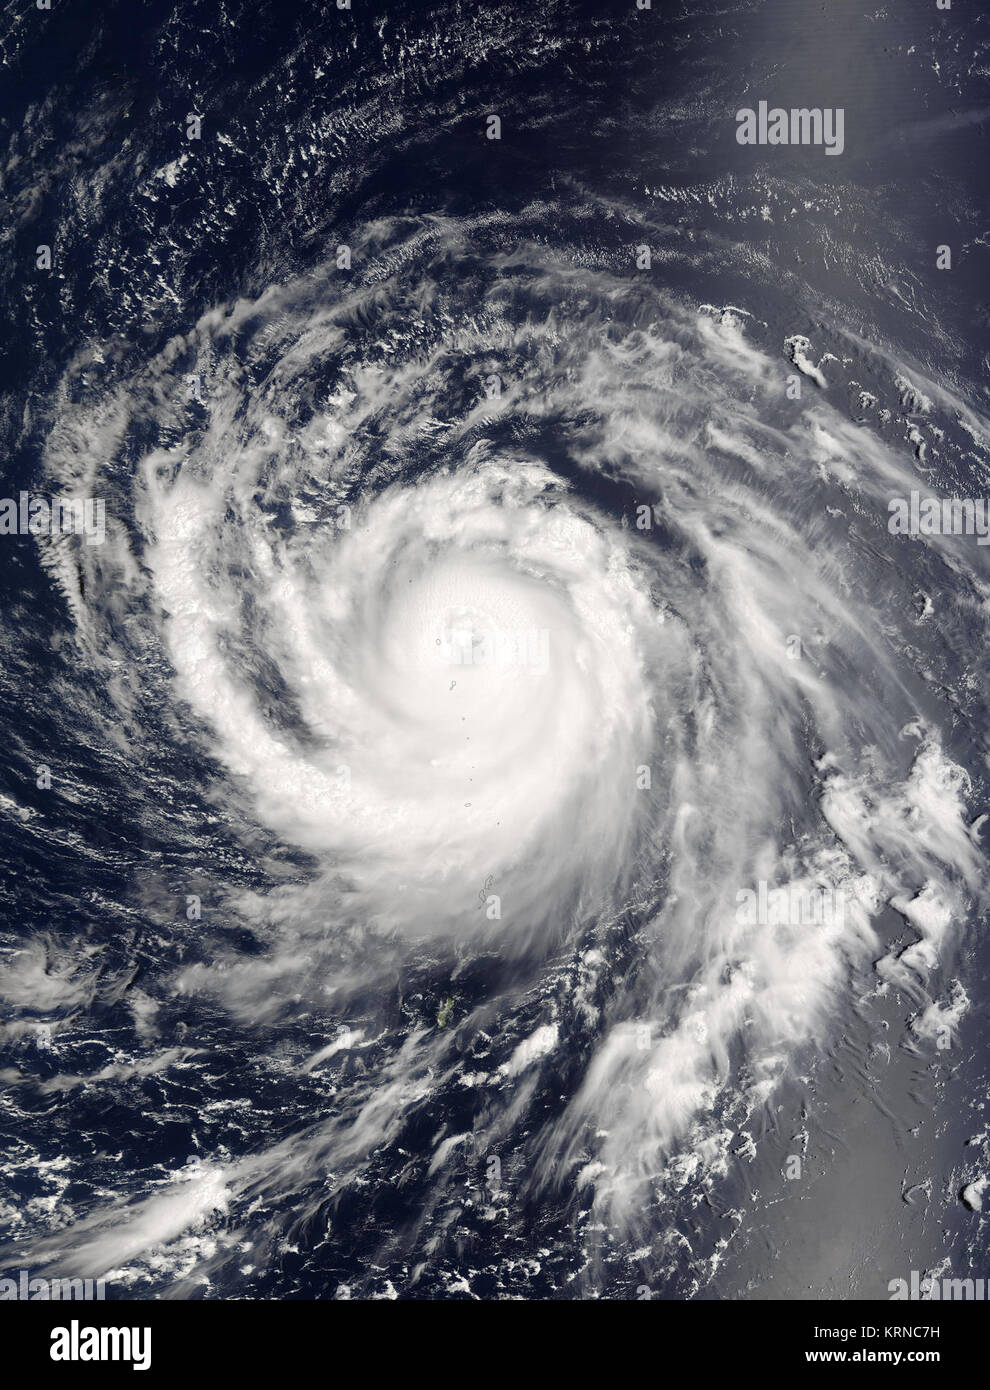 <p>The MODIS instrument aboard NASA's Terra satellite captured this true-color image of Typhoon Songda on September 1, 2004 at 00:40 UTC. At the time this image was taken Songda was located approximately 740 km (460 miles) southeast of Iwo Jima, Japan and was moving towards the northwest at 28 km/hr (17 mph). Maximum sustained winds were near 232 km/hr (144 mph) with higher gusts to 278 km/hr (173 mph). </p><p>The MODIS Rapid Response System provides this image at  rapidfire.sci.gsfc.nasa.gov/gallery/?2004245-0901/Songda.A2004245.0040 additional resolutions and formats. </p><p>NASA image court Stock Photo